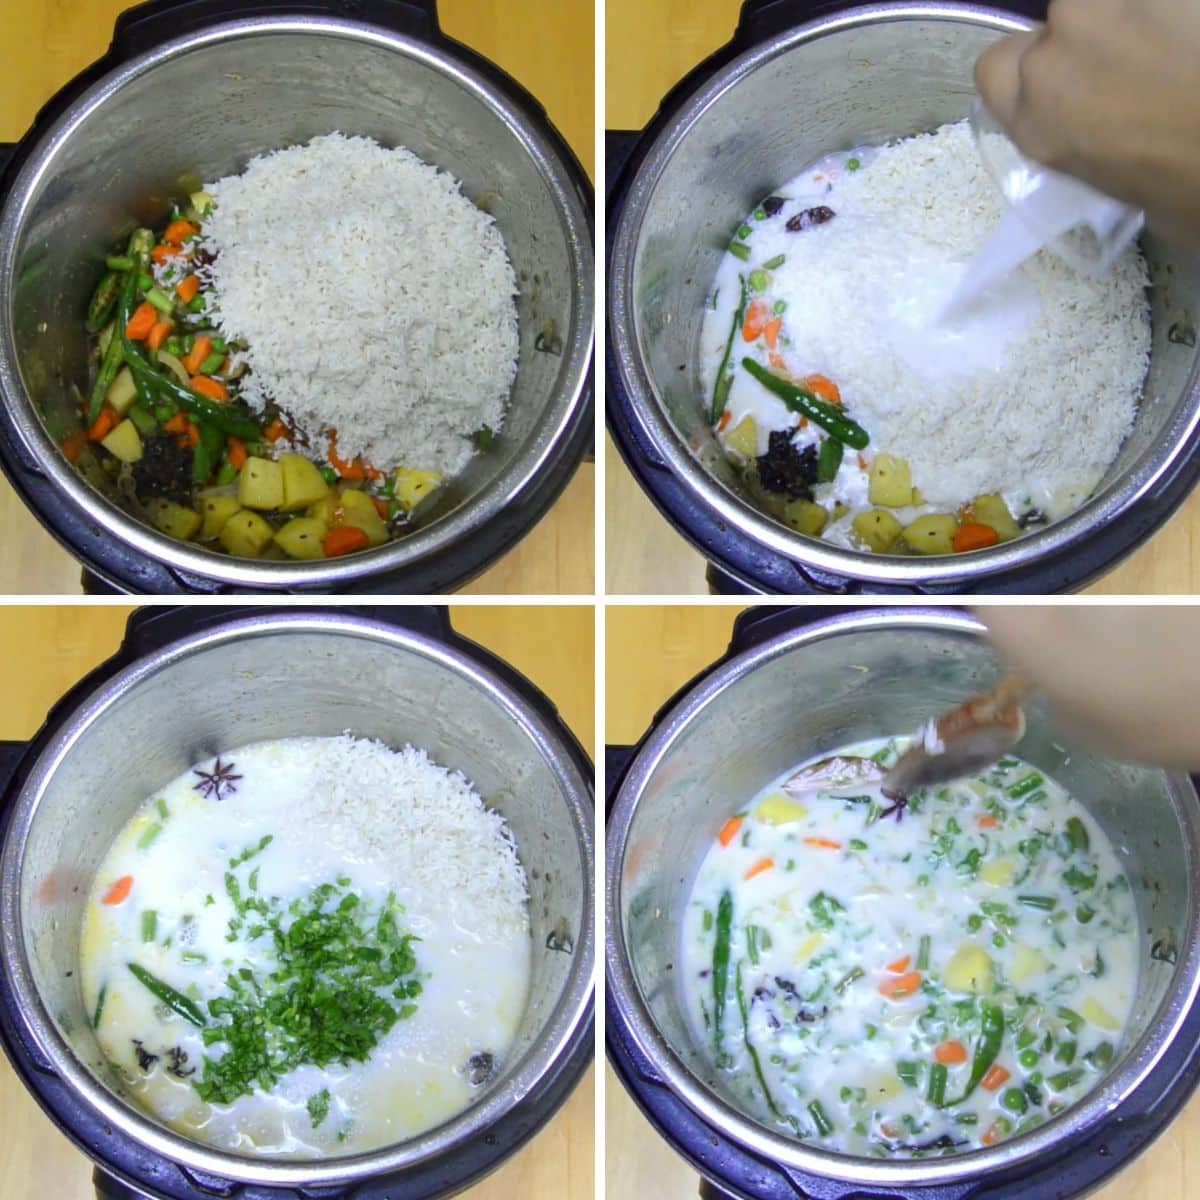 college of 4 images showing the process of combining rice with liquids and stirring with a wooden spoon.